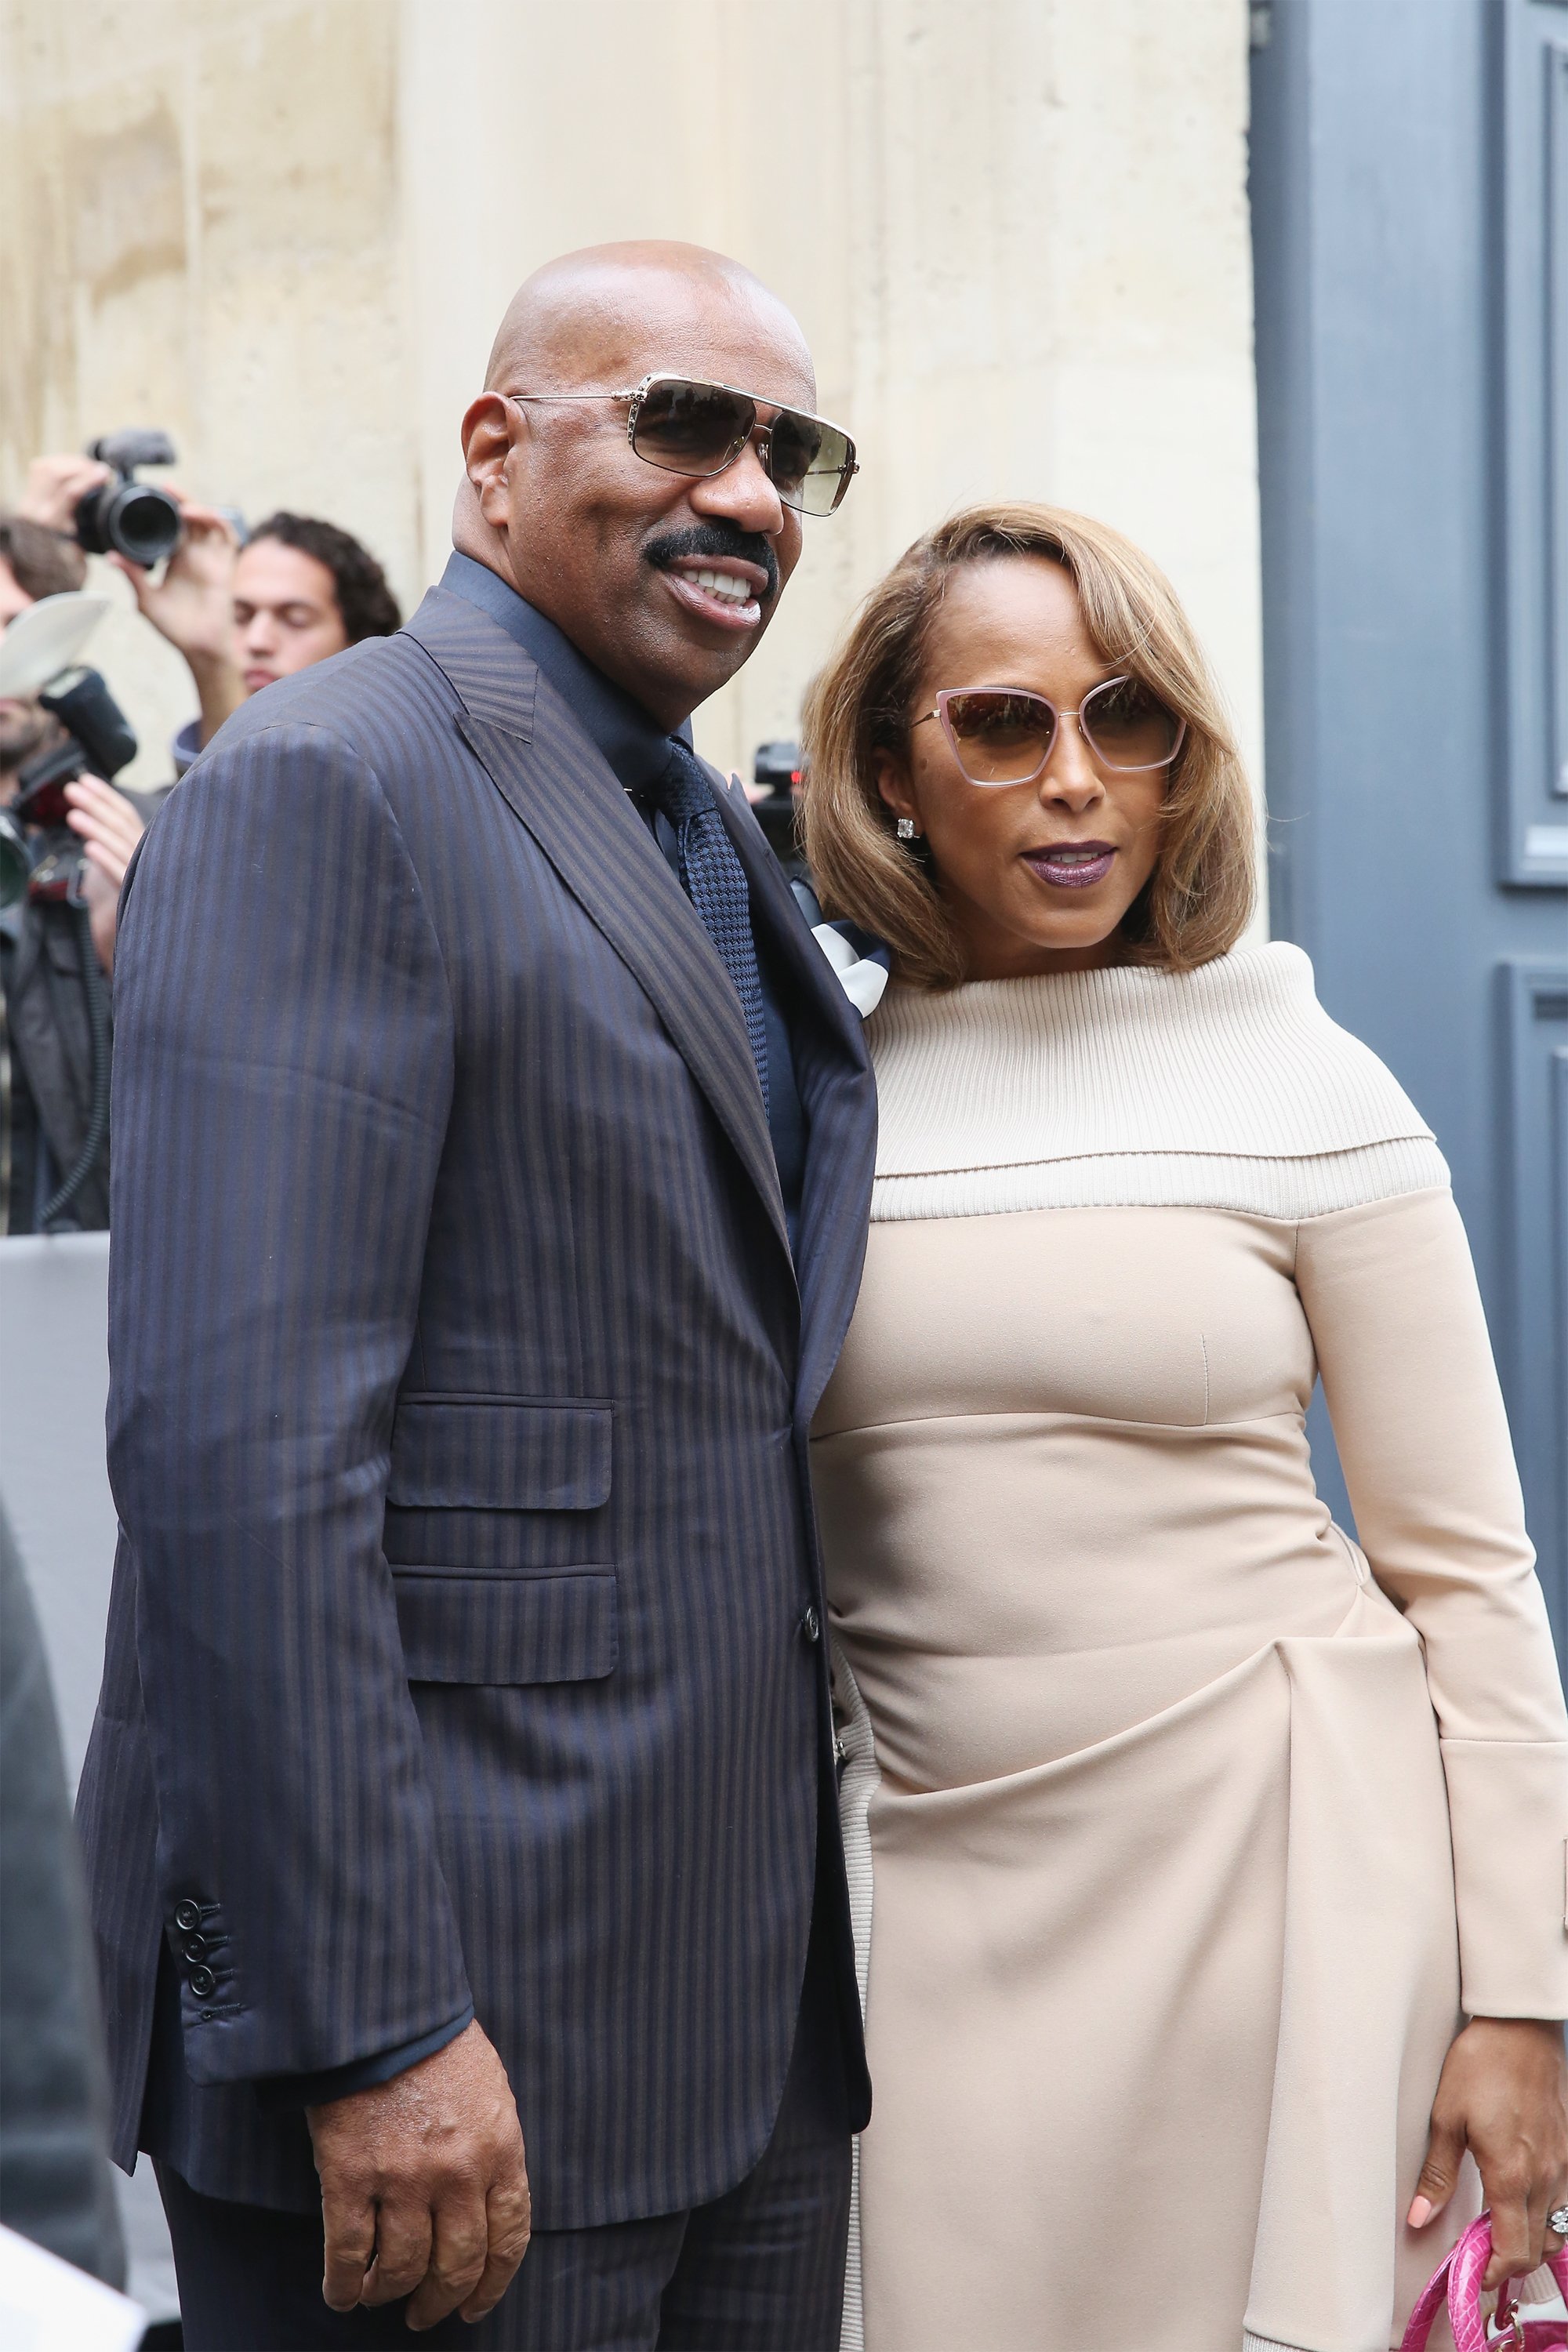 Steve & Marjorie Harvey during the Paris Fashion Week Womenswear Spring/Summer 2017 on Sept. 30, 2016 in Paris, France | Photo: Getty Images